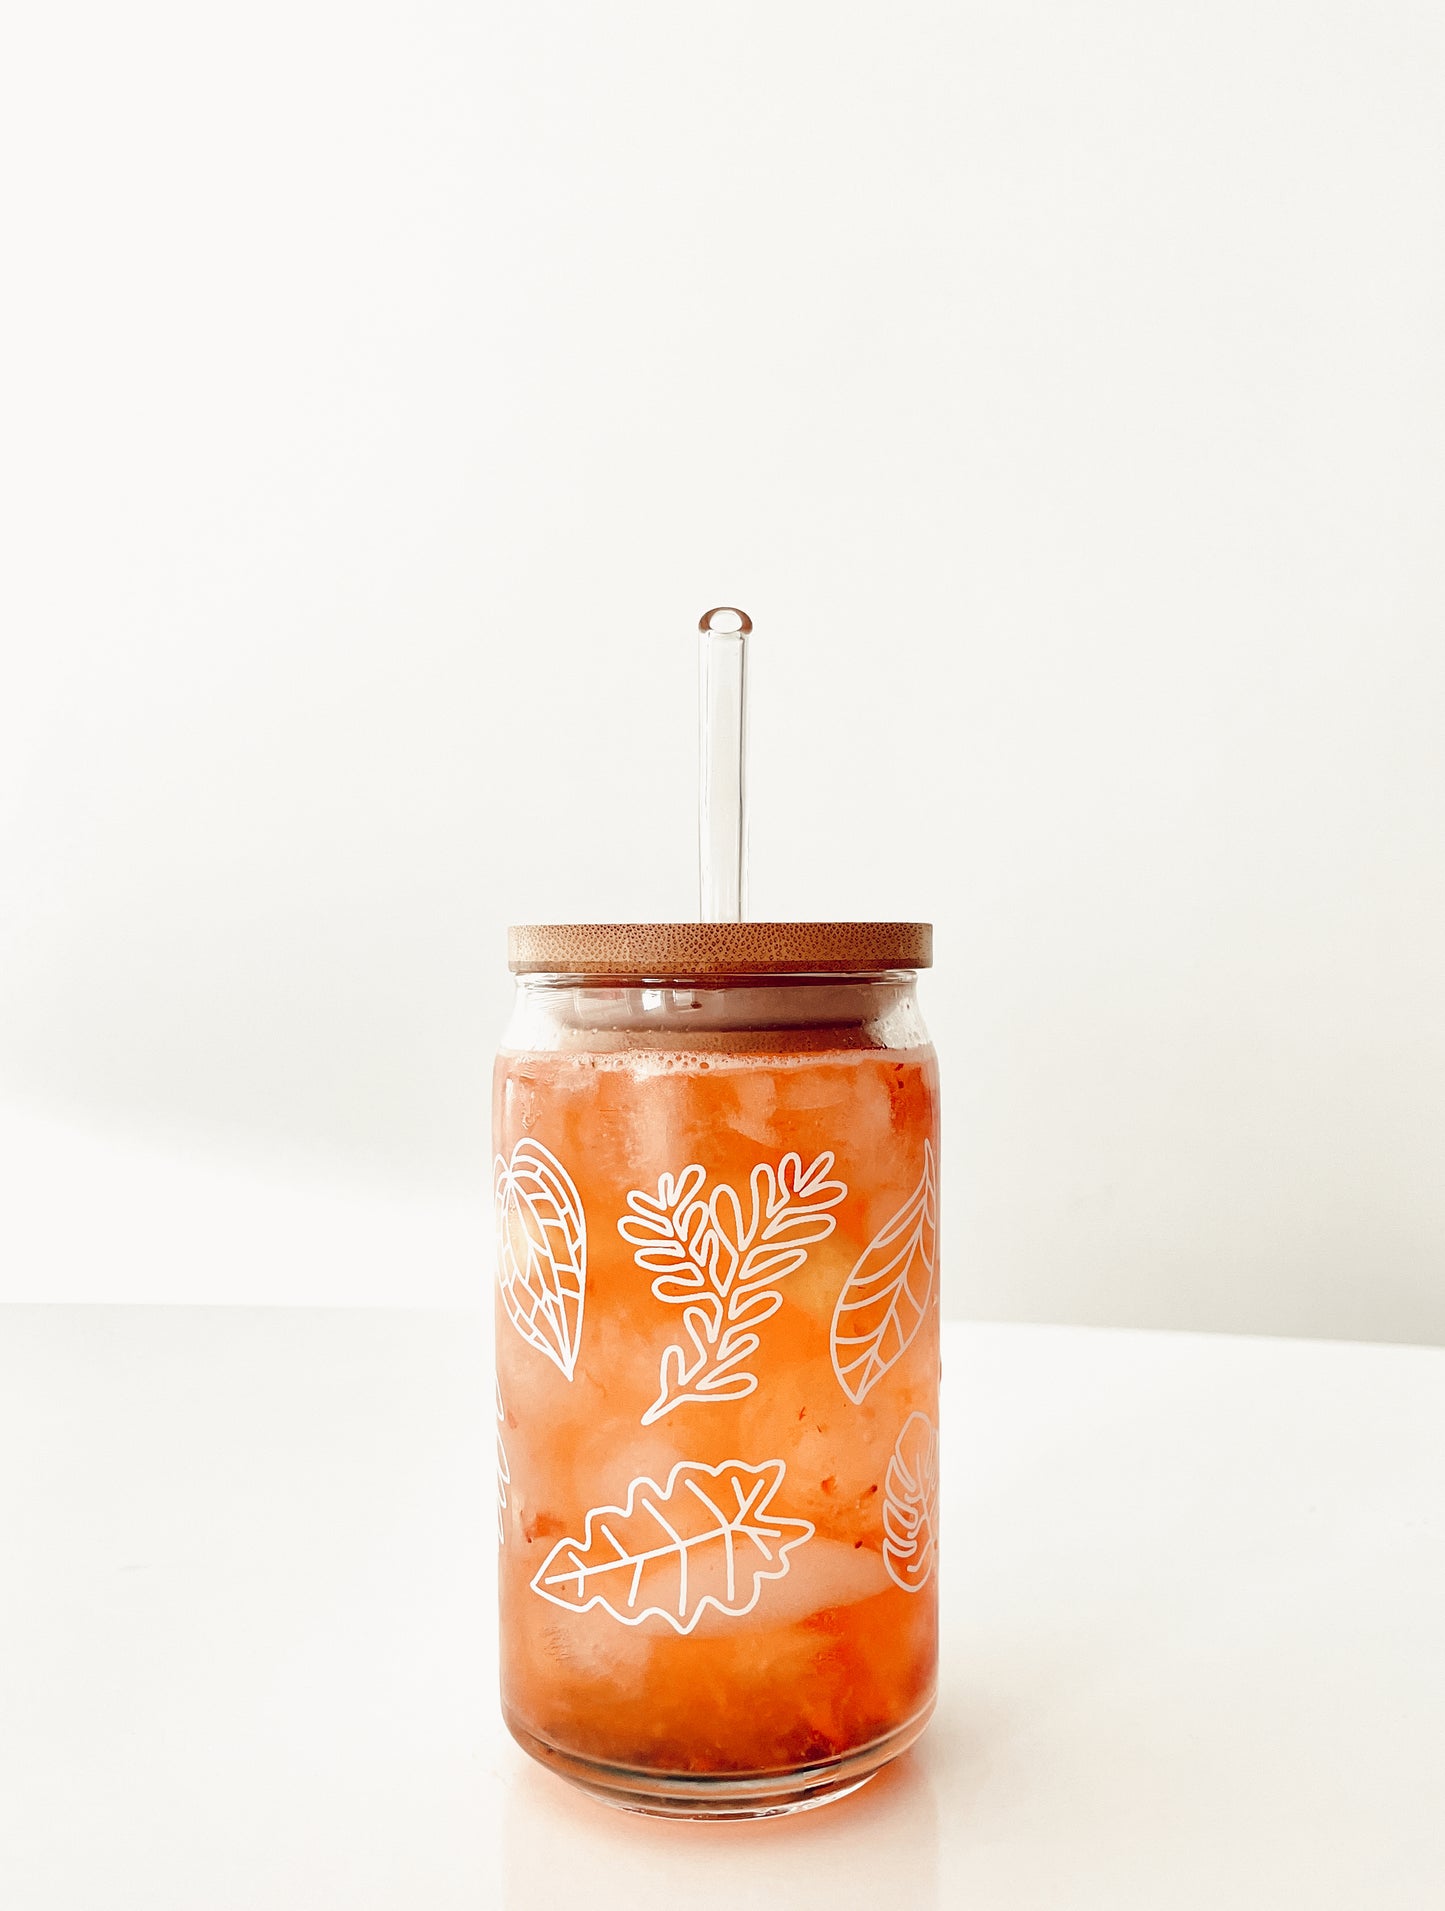 16 oz. "Plant" Beer Glasses with amber glass straw and lid